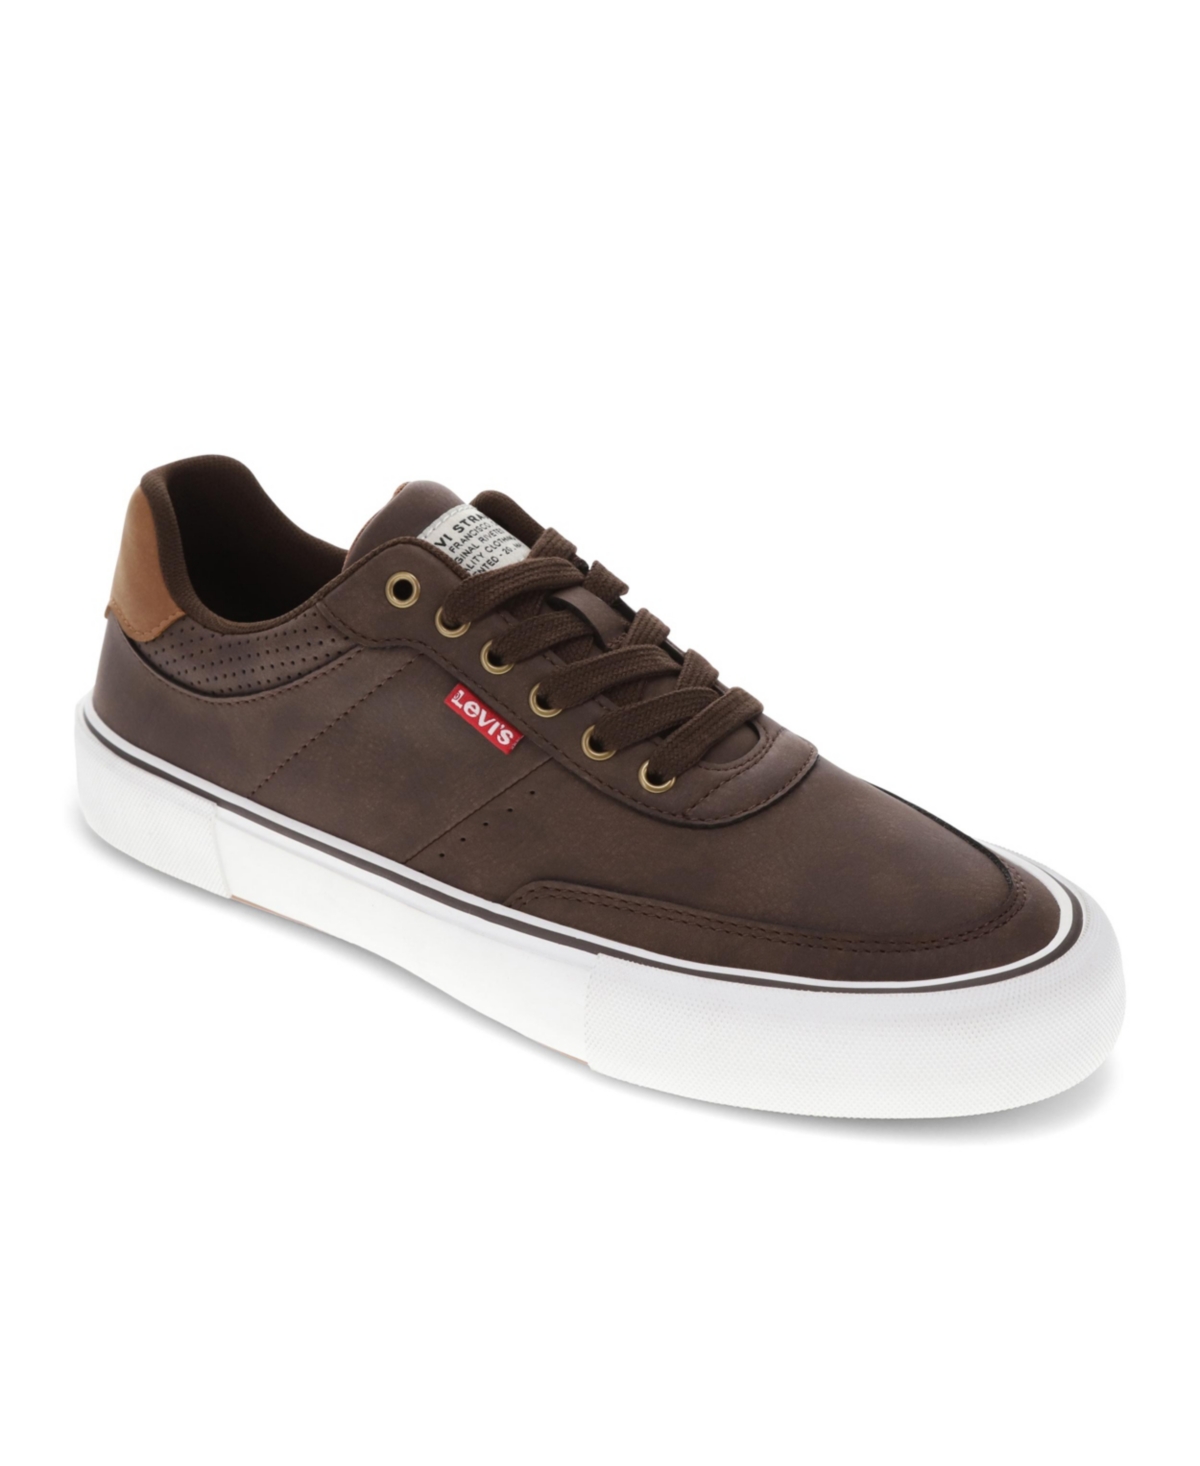 Men's Munro Ul Faux Leather Lace-Up Sneakers - Brown, Tan